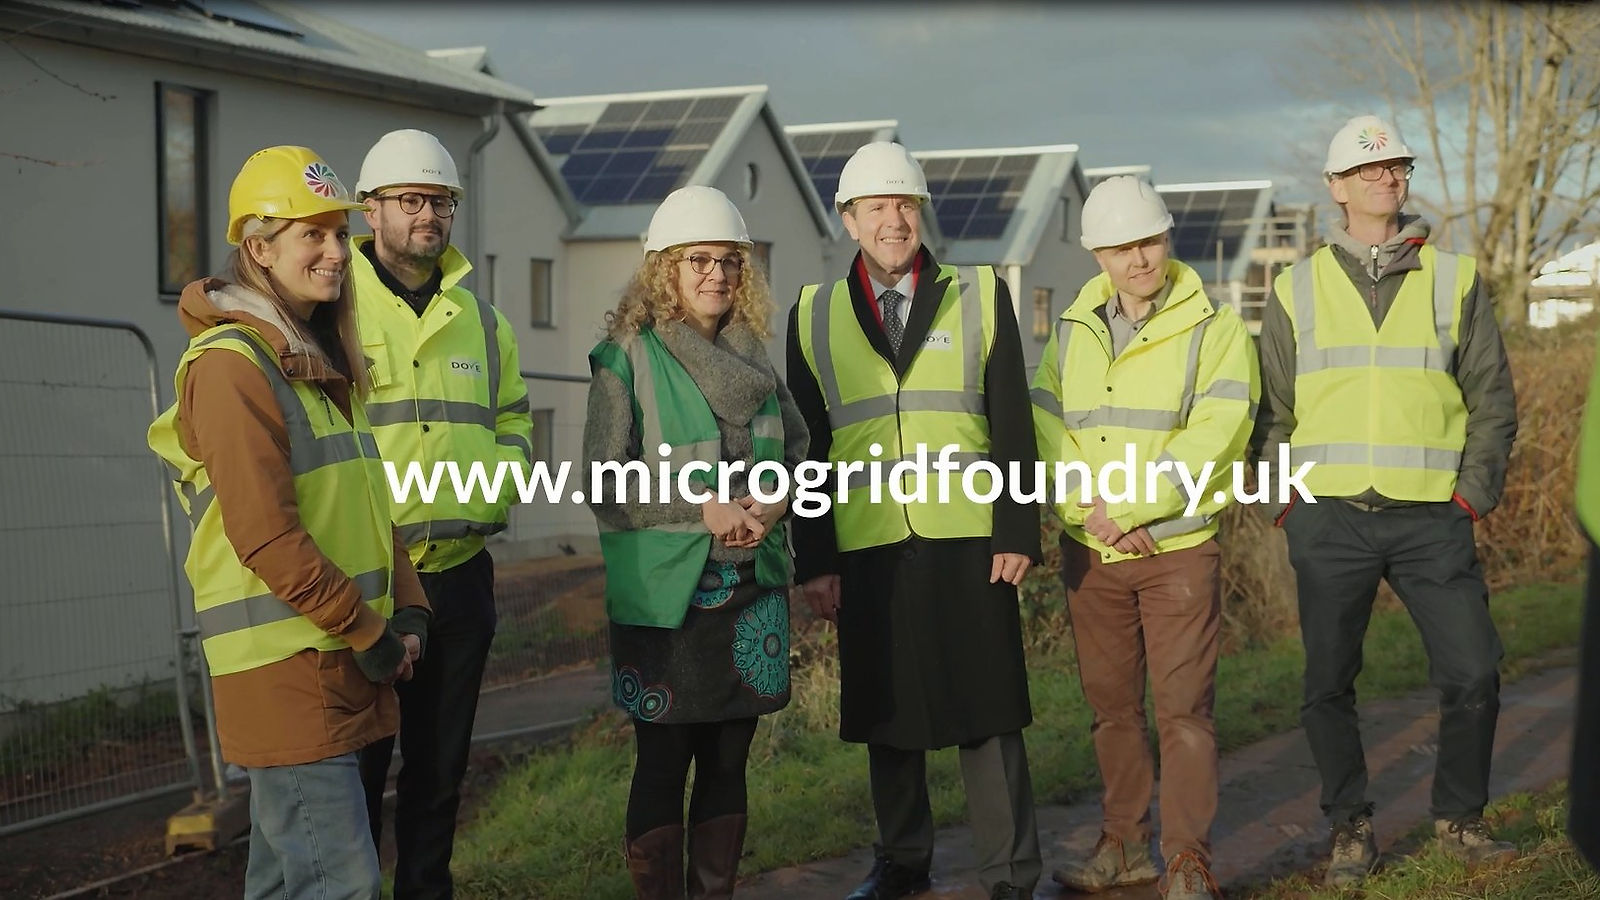 Microgrid Foundry - Water Lilies